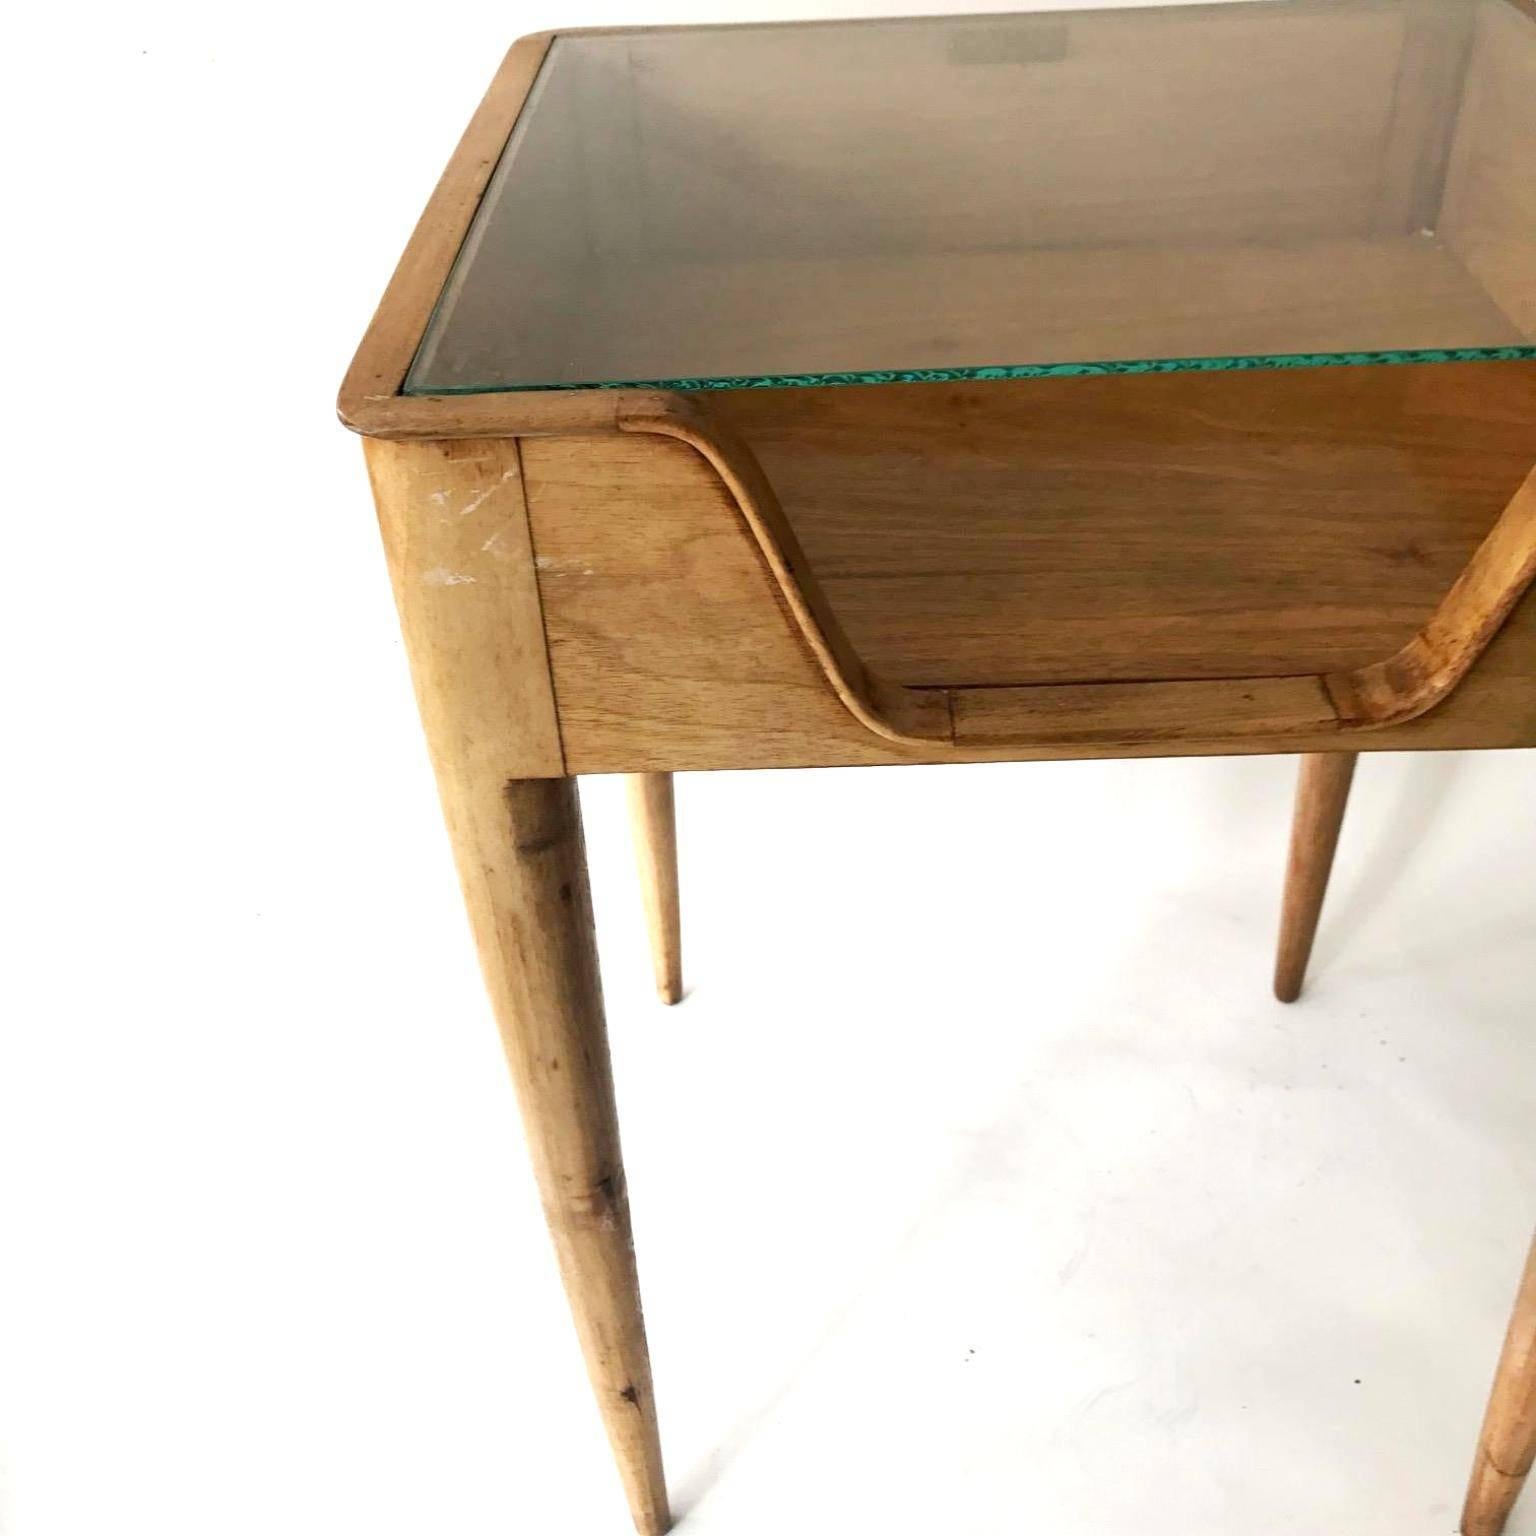 20th Century Pair of Side Tables circa 1937 Attributed to Gio Ponti, Italian, Milan For Sale